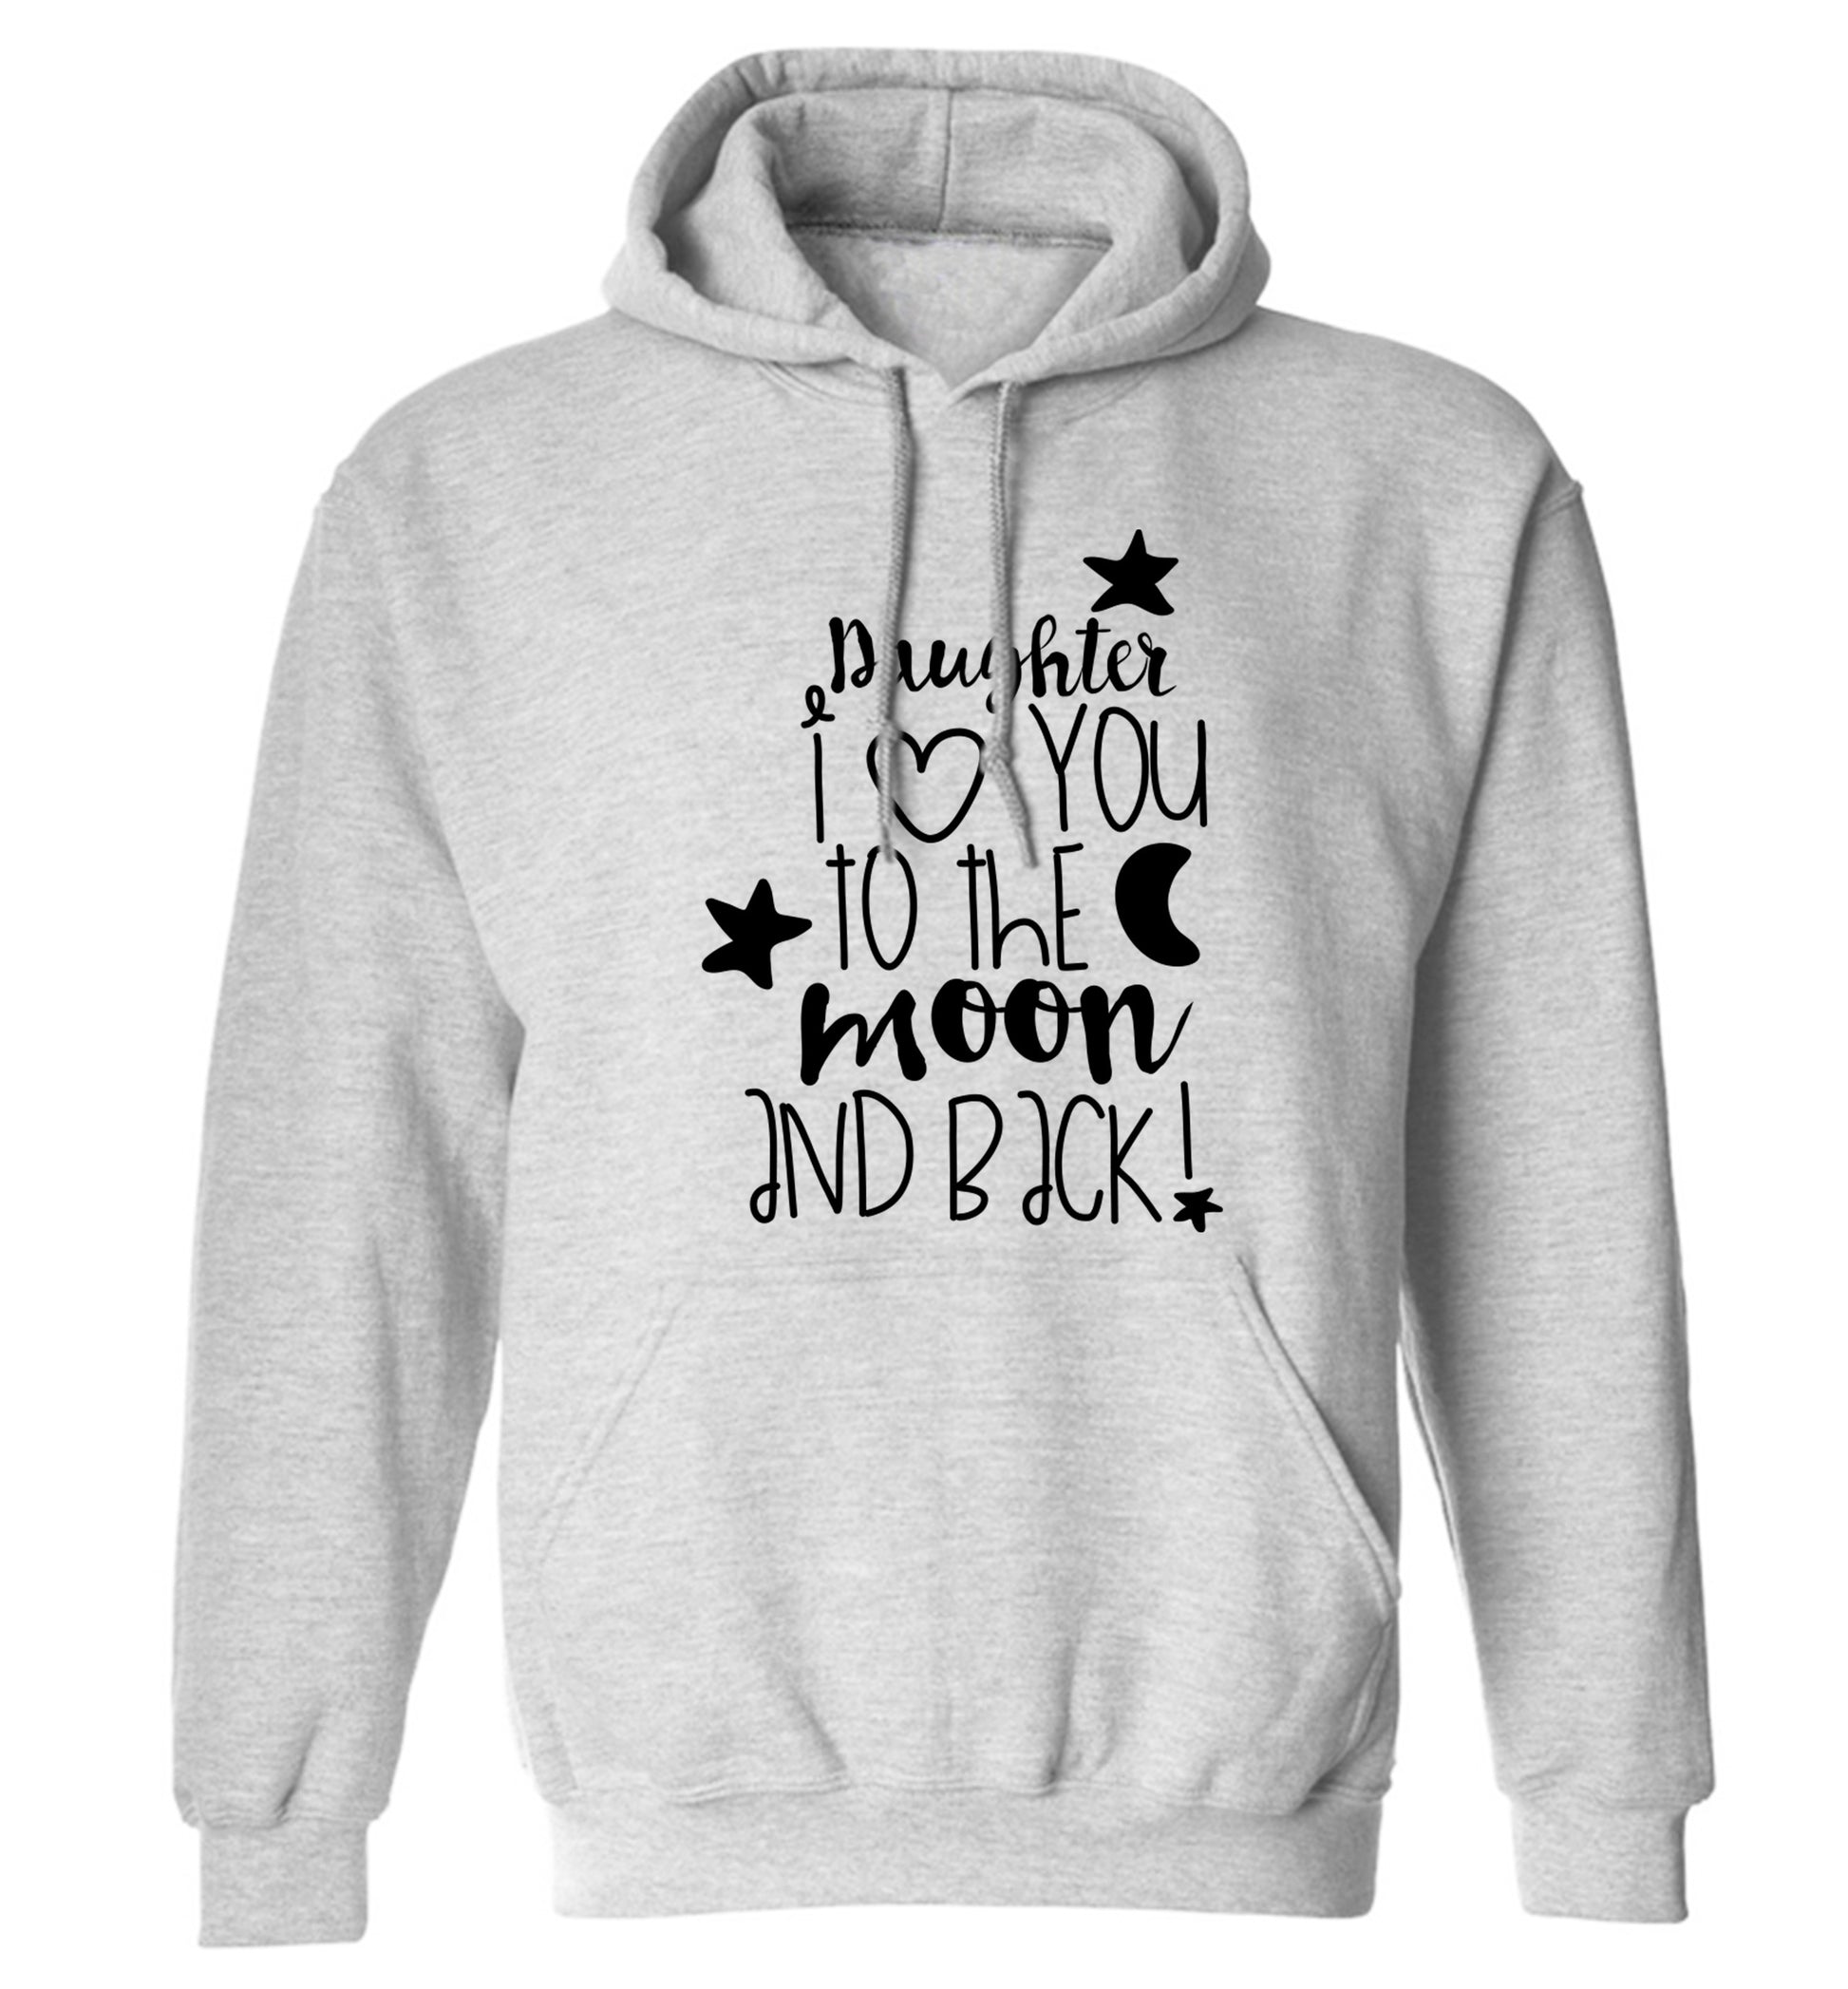 Daughter I love you to the moon and back adults unisex grey hoodie 2XL